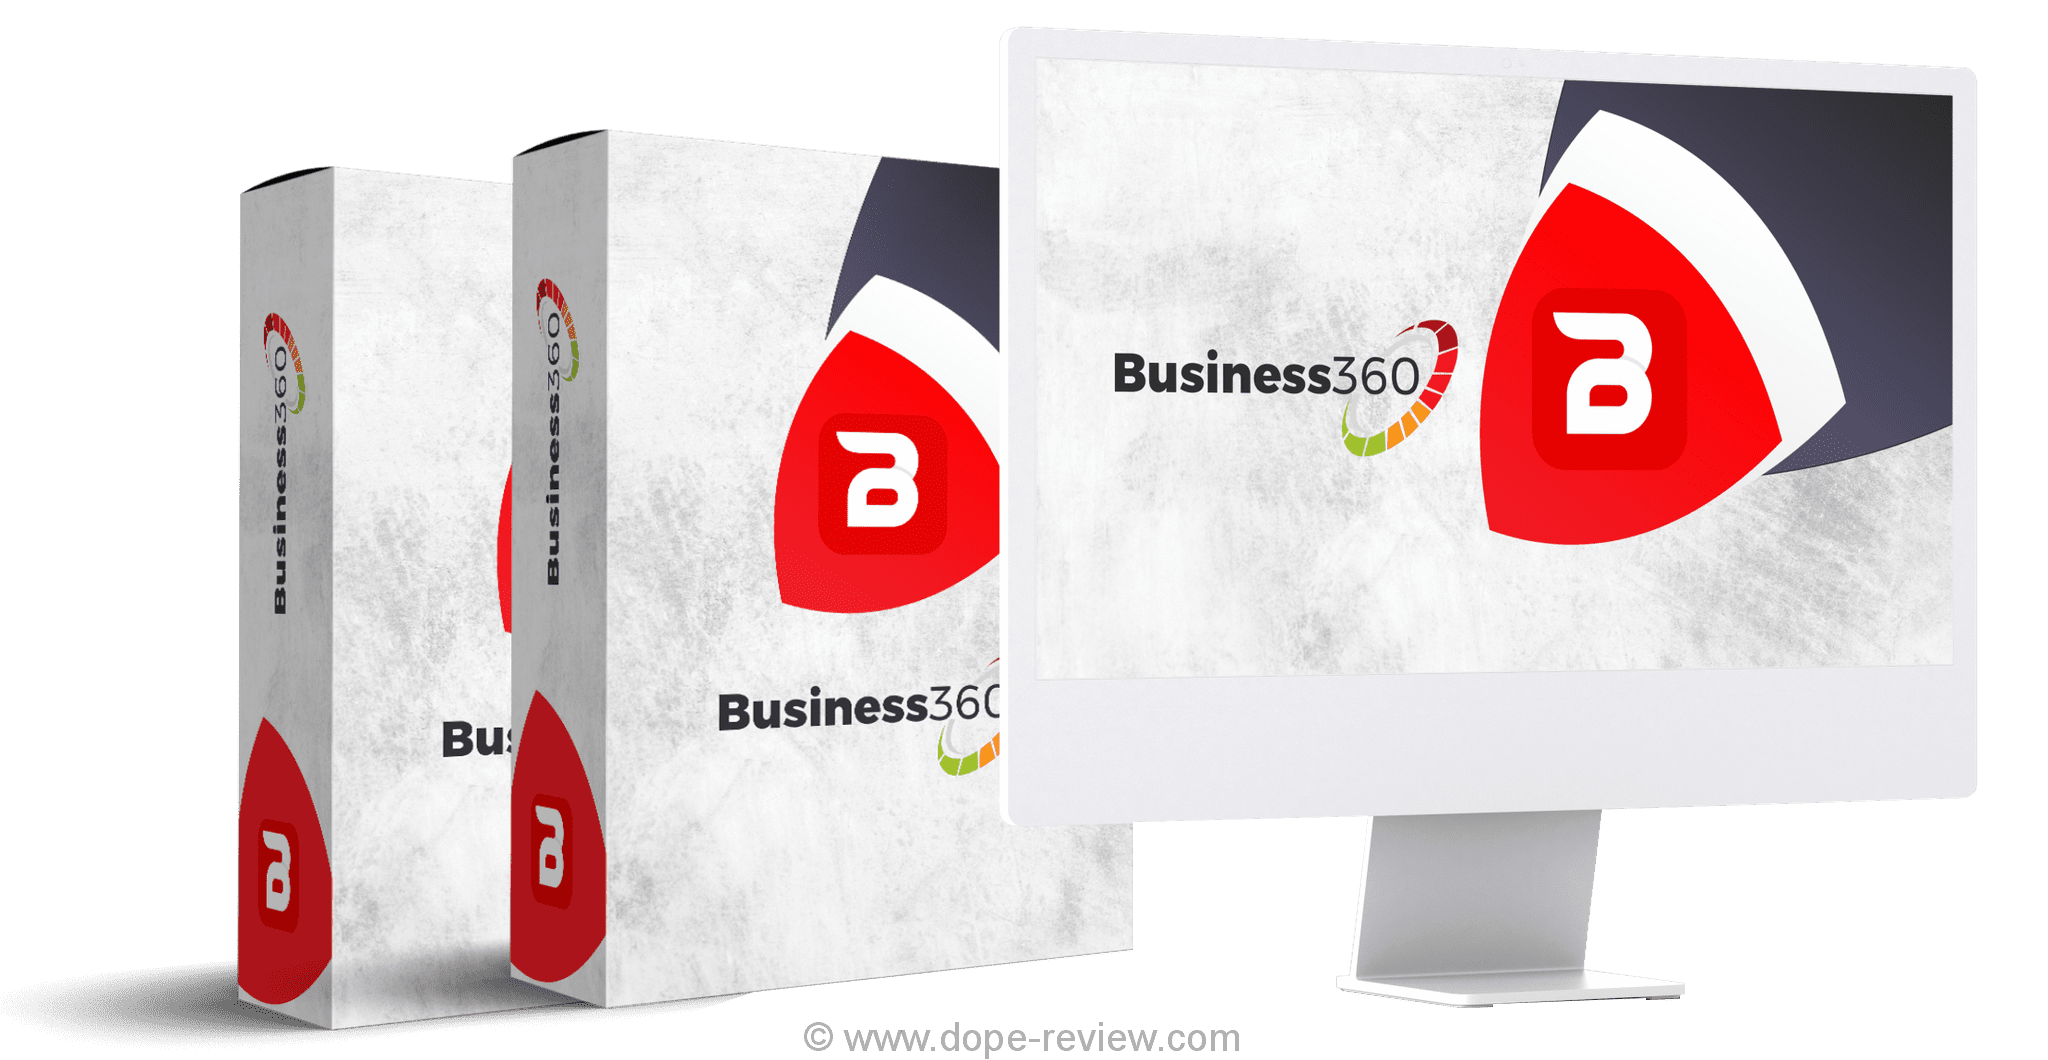 Business360